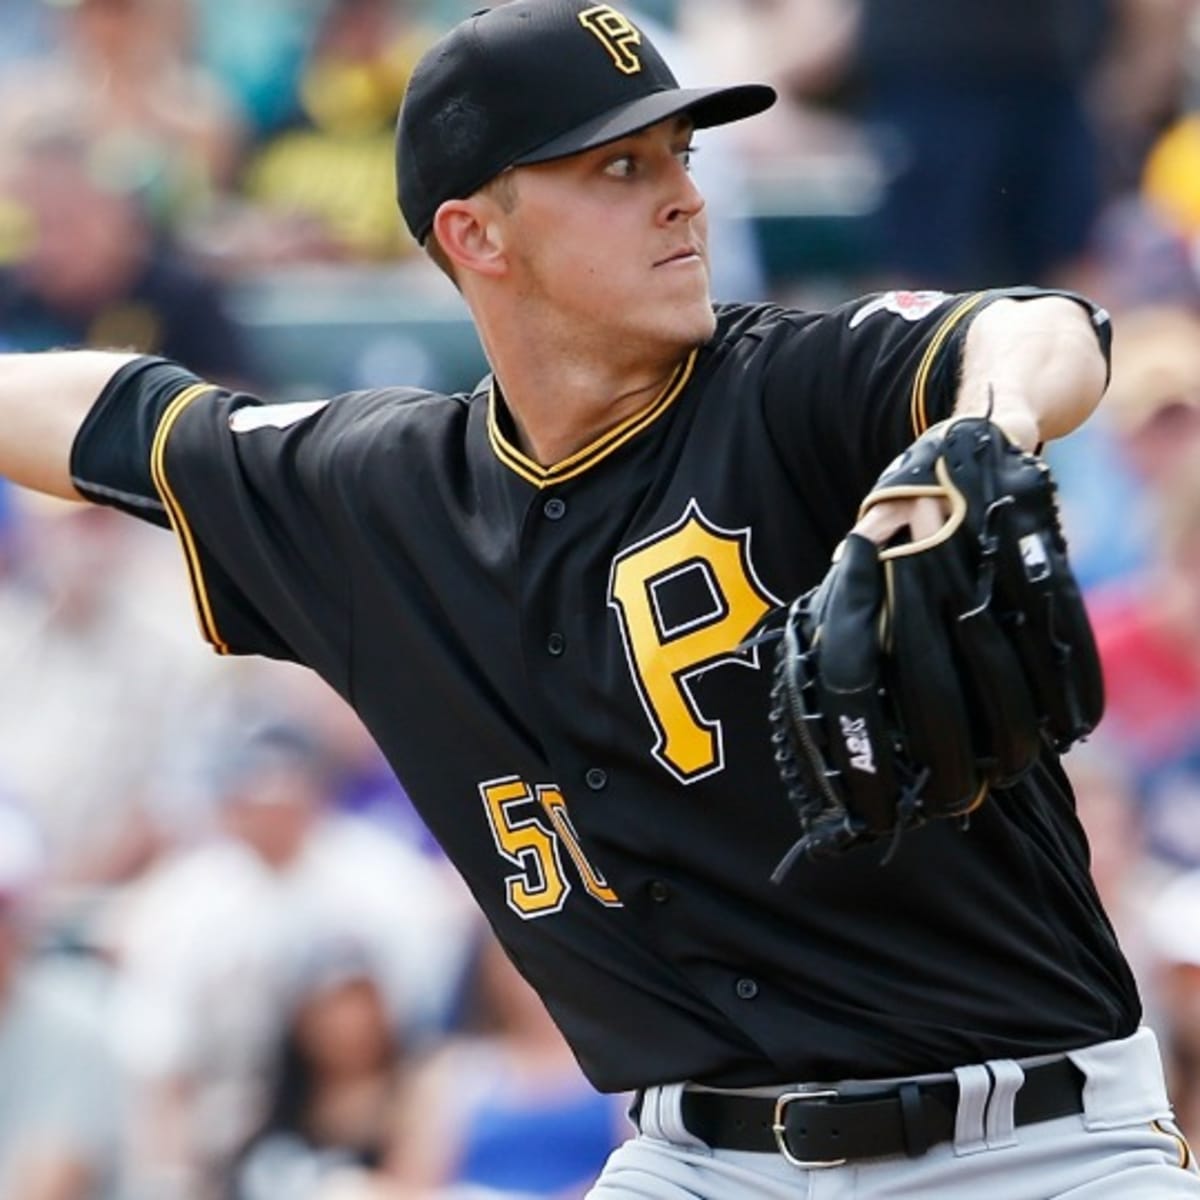 Indians' Jameson Taillon makes 2016 Victory Field debut